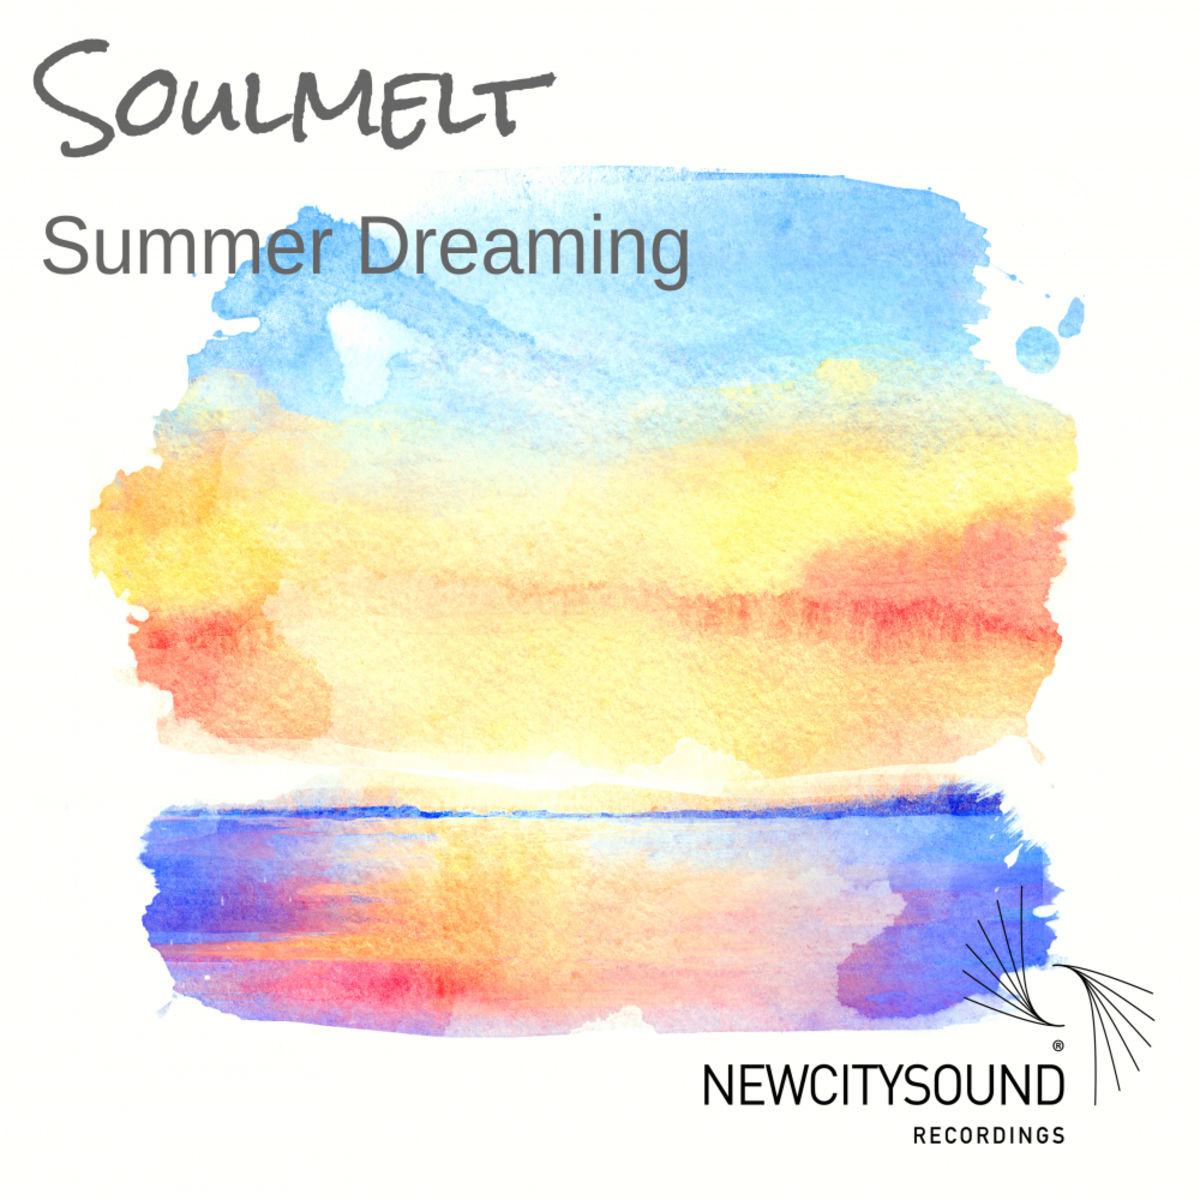 Soulmelt - Summer Dreaming / New City Sound Recordings